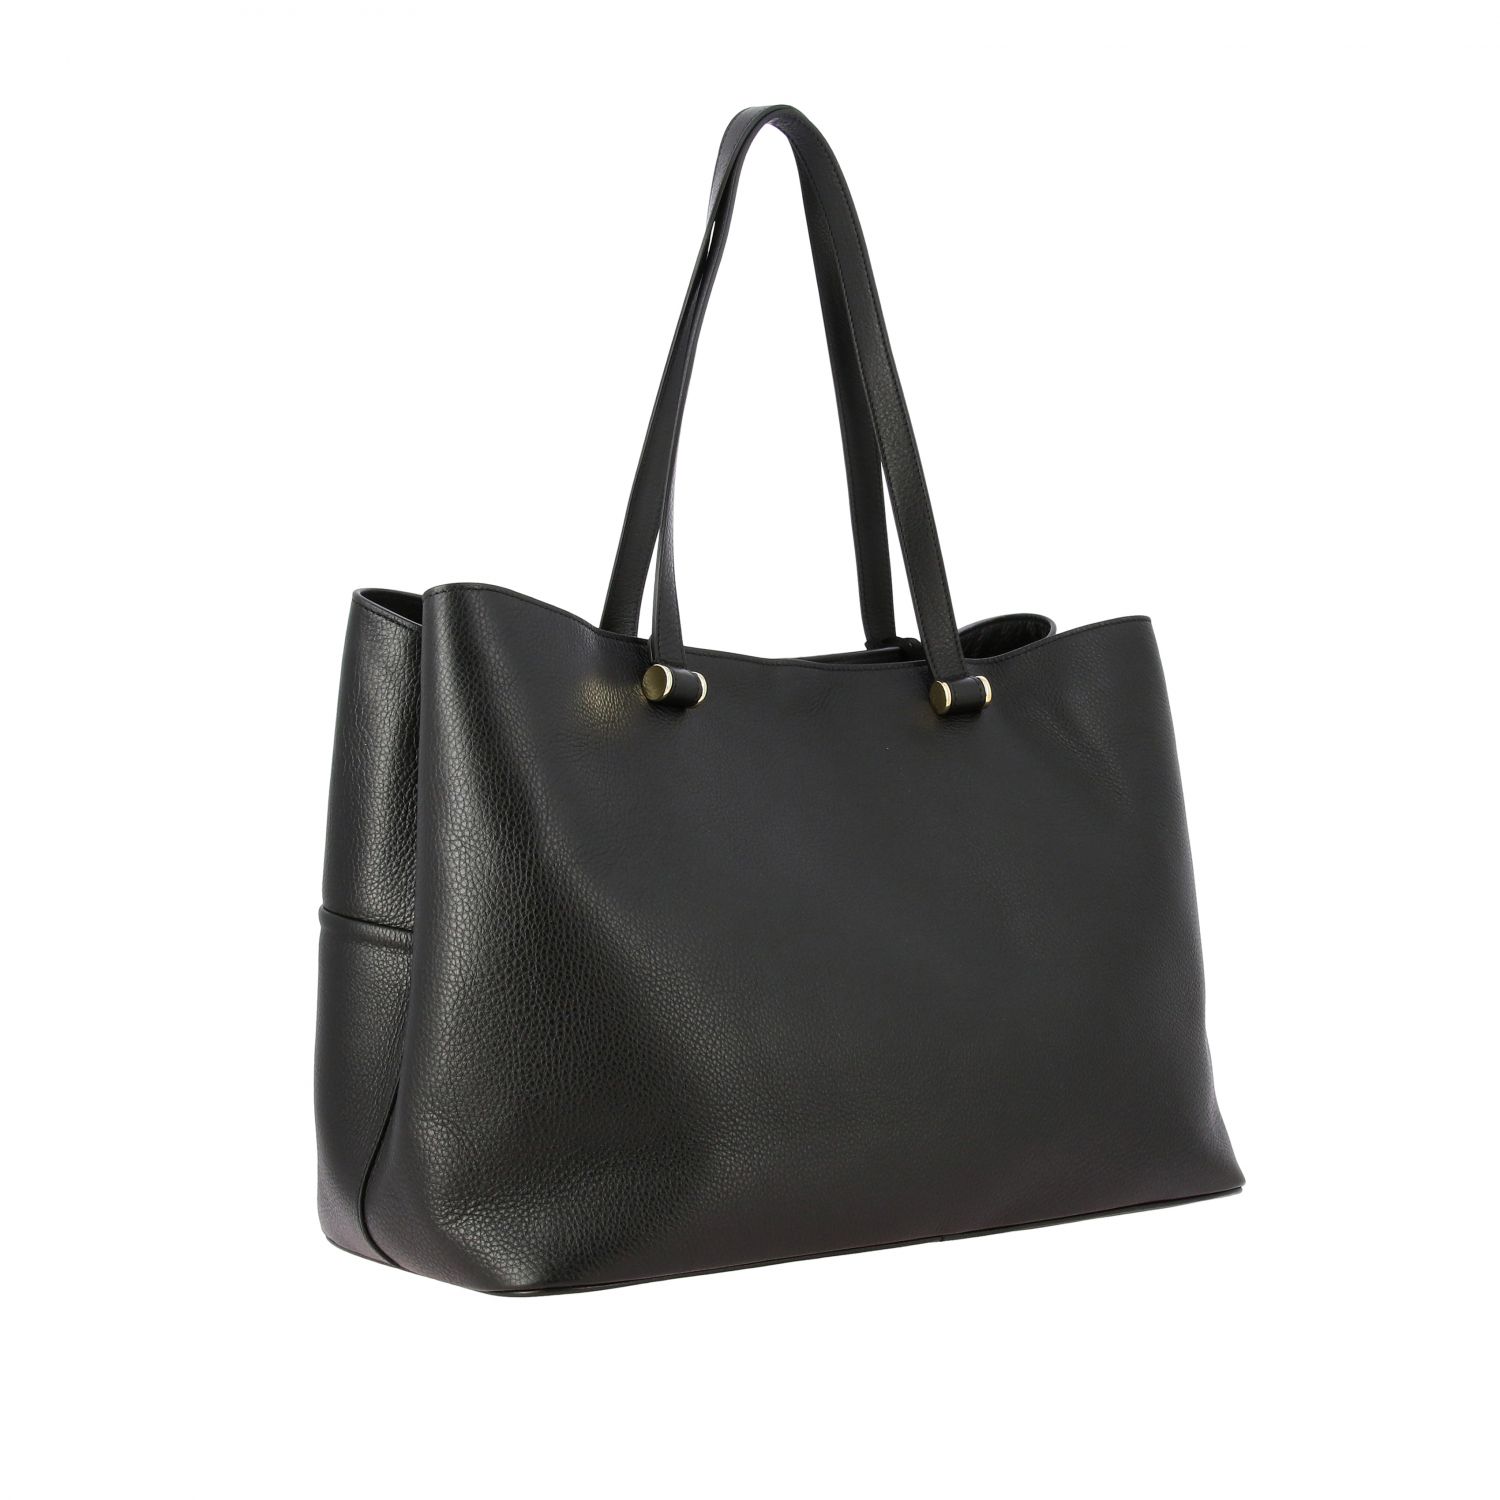 Max Mara Outlet: Extra large leather bag with printed logo - Black ...